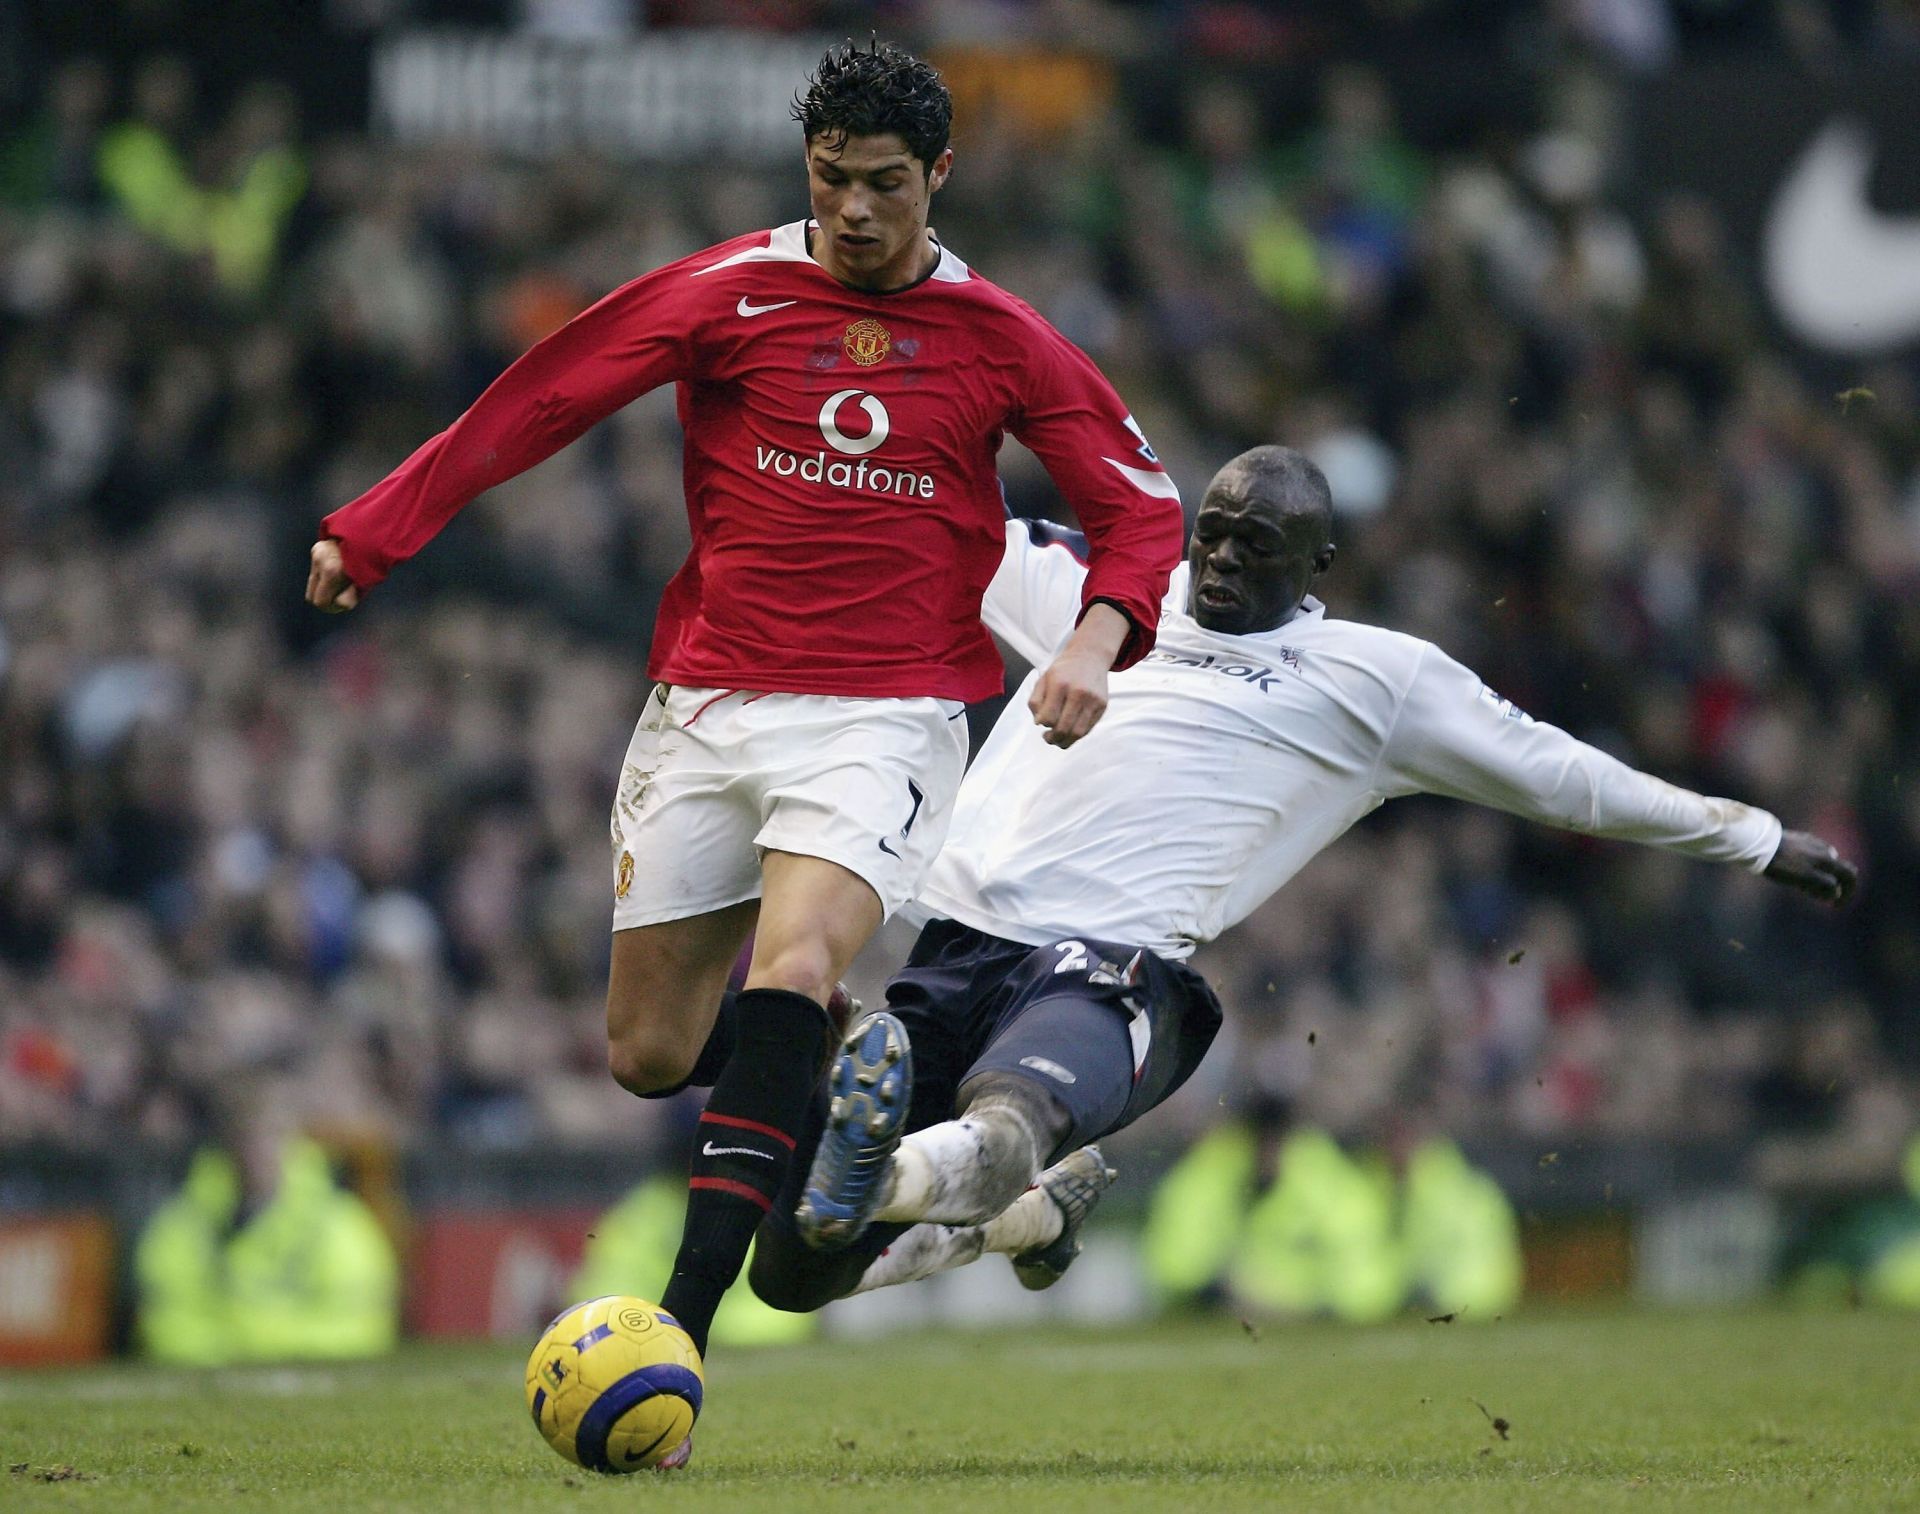 In his second season at Old Trafford, a young Ronaldo cemented his place among a handful of veterans